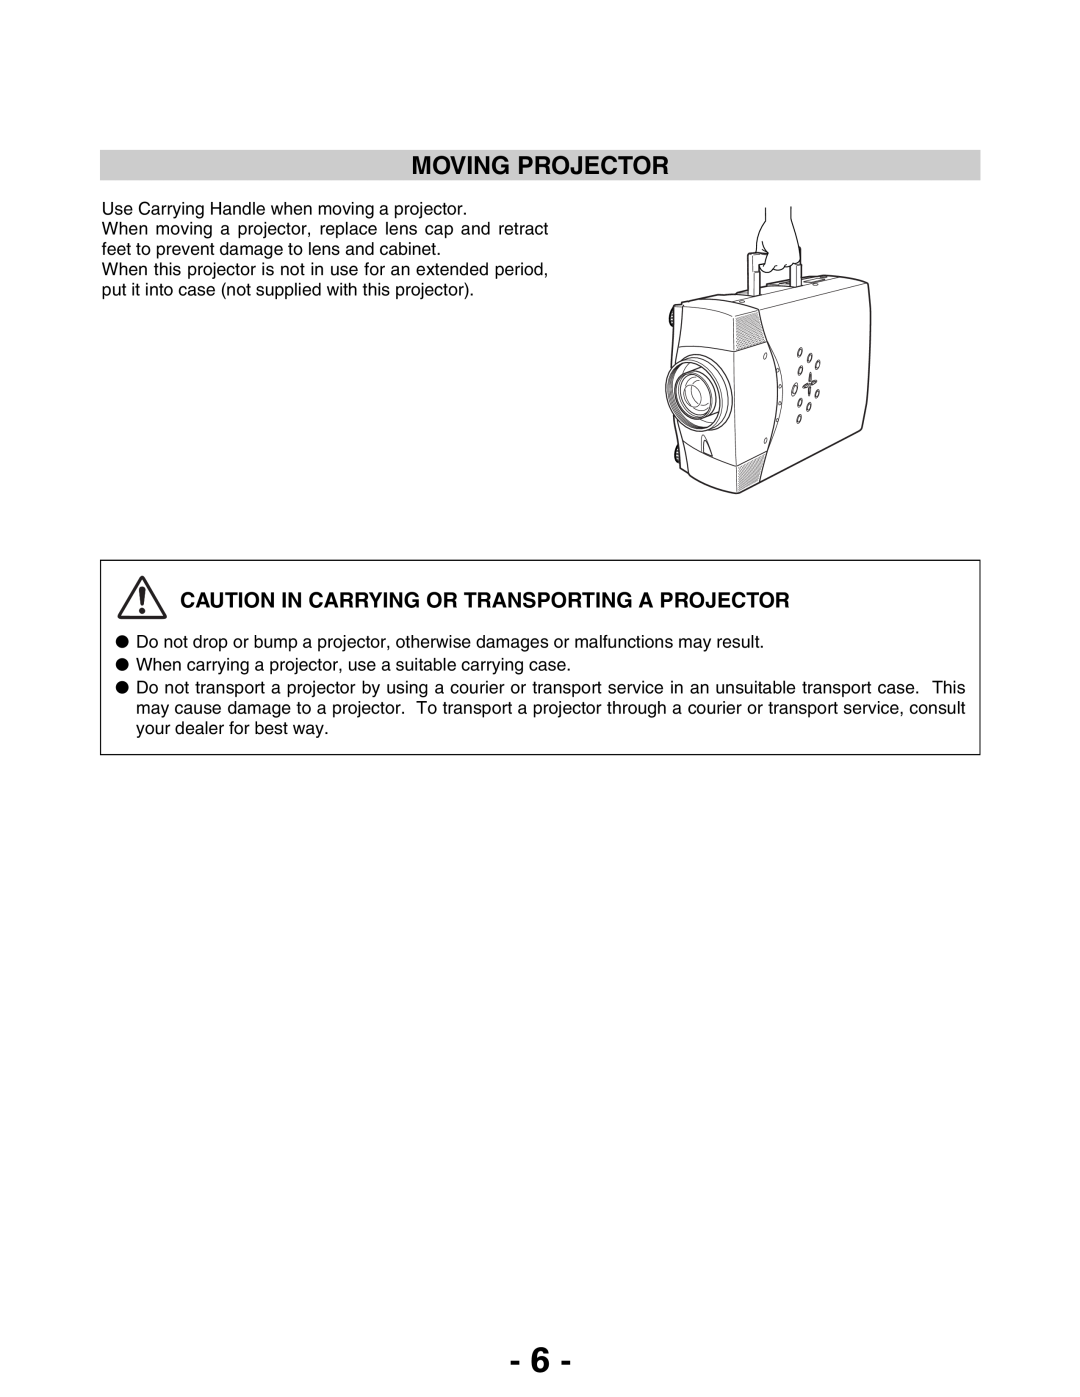 Christie Digital Systems 103-011100-01 owner manual Moving Projector, Caution In Carrying Or Transporting A Projector 